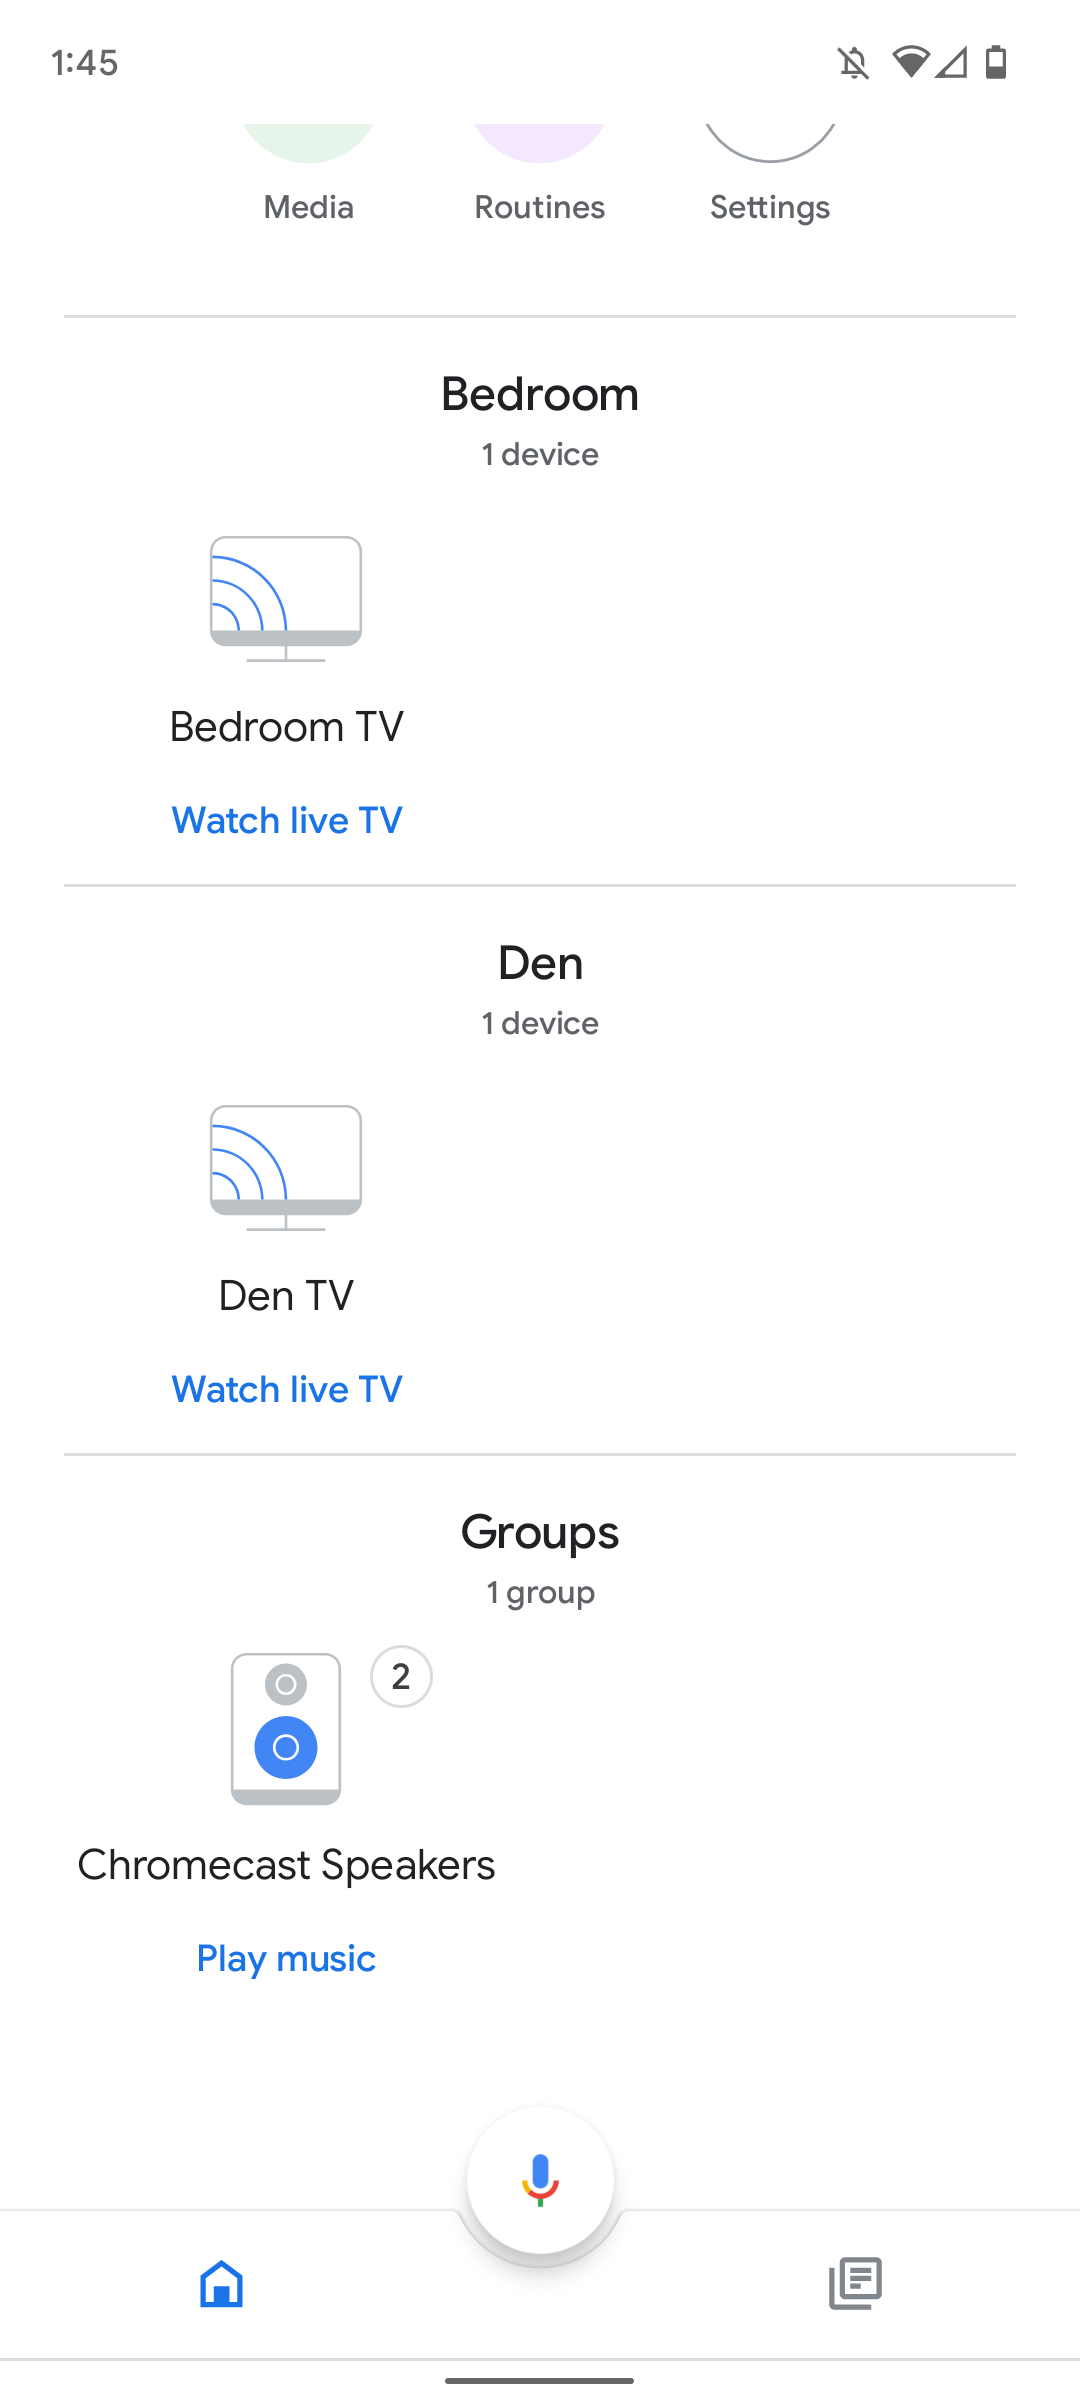 google home app screenshot showing a variety of speakers and devices